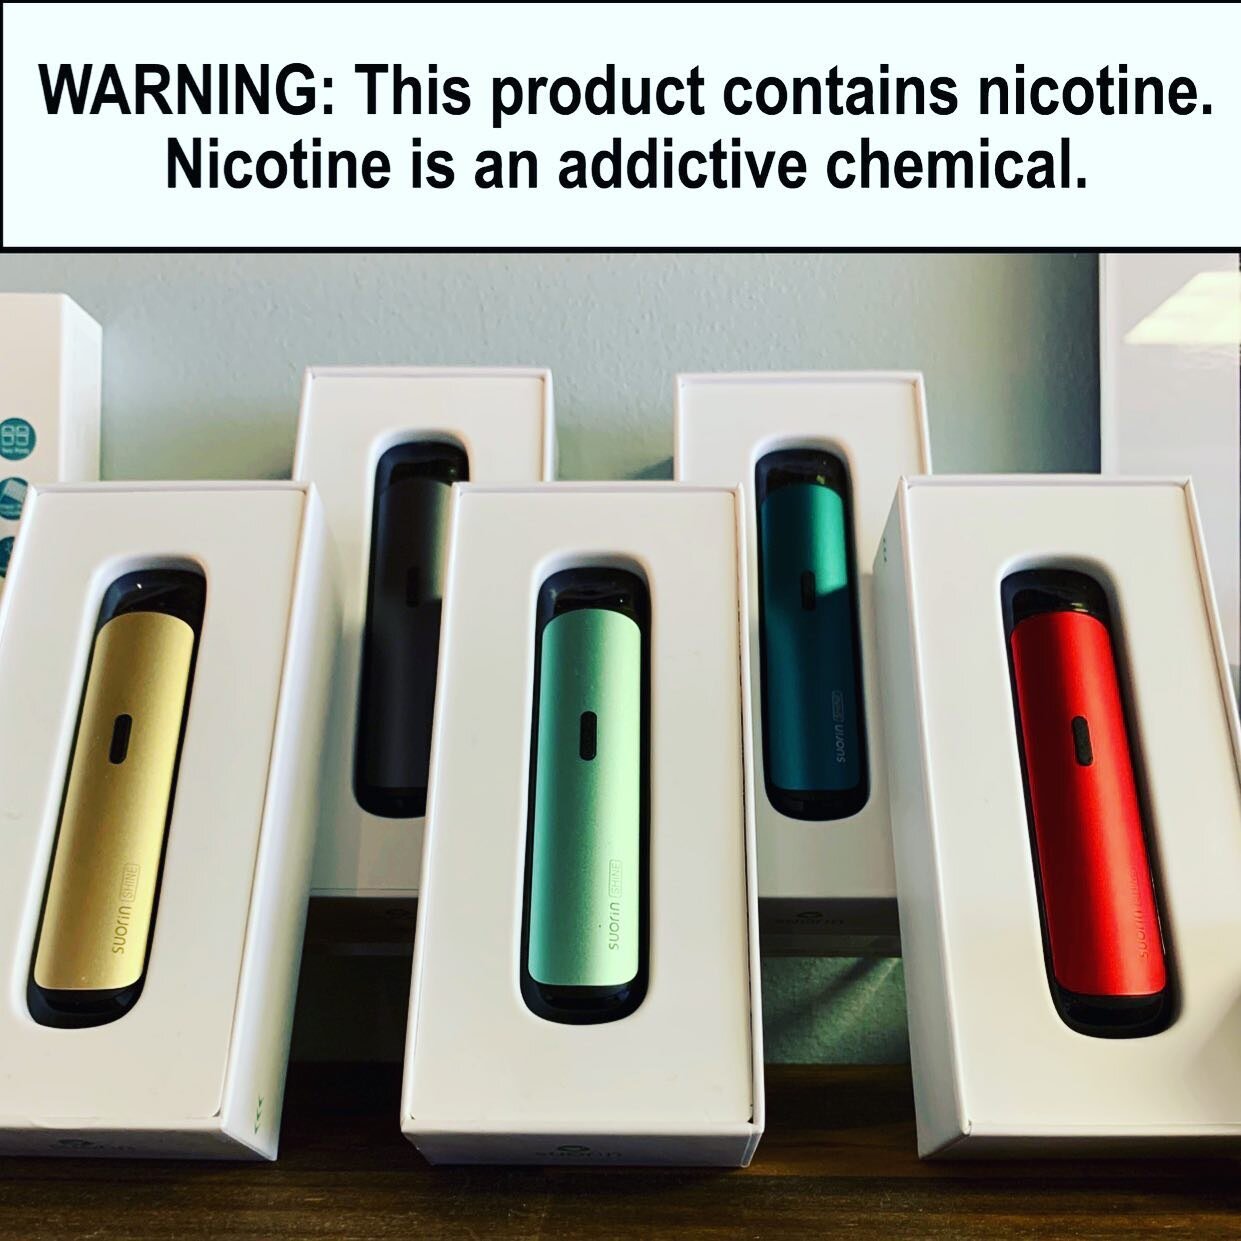 🚨 NEW IN STOCK 🚨 You guys asked, we delivered &mdash; Now available, the Suorin Shine!!
&mdash;&mdash;&mdash;&mdash;&mdash;&mdash;&mdash;&mdash;&mdash;&mdash;&mdash;&mdash;&mdash;&mdash;&mdash;&mdash;&mdash;&mdash;&mdash;&mdash;&mdash;
#newdevice #